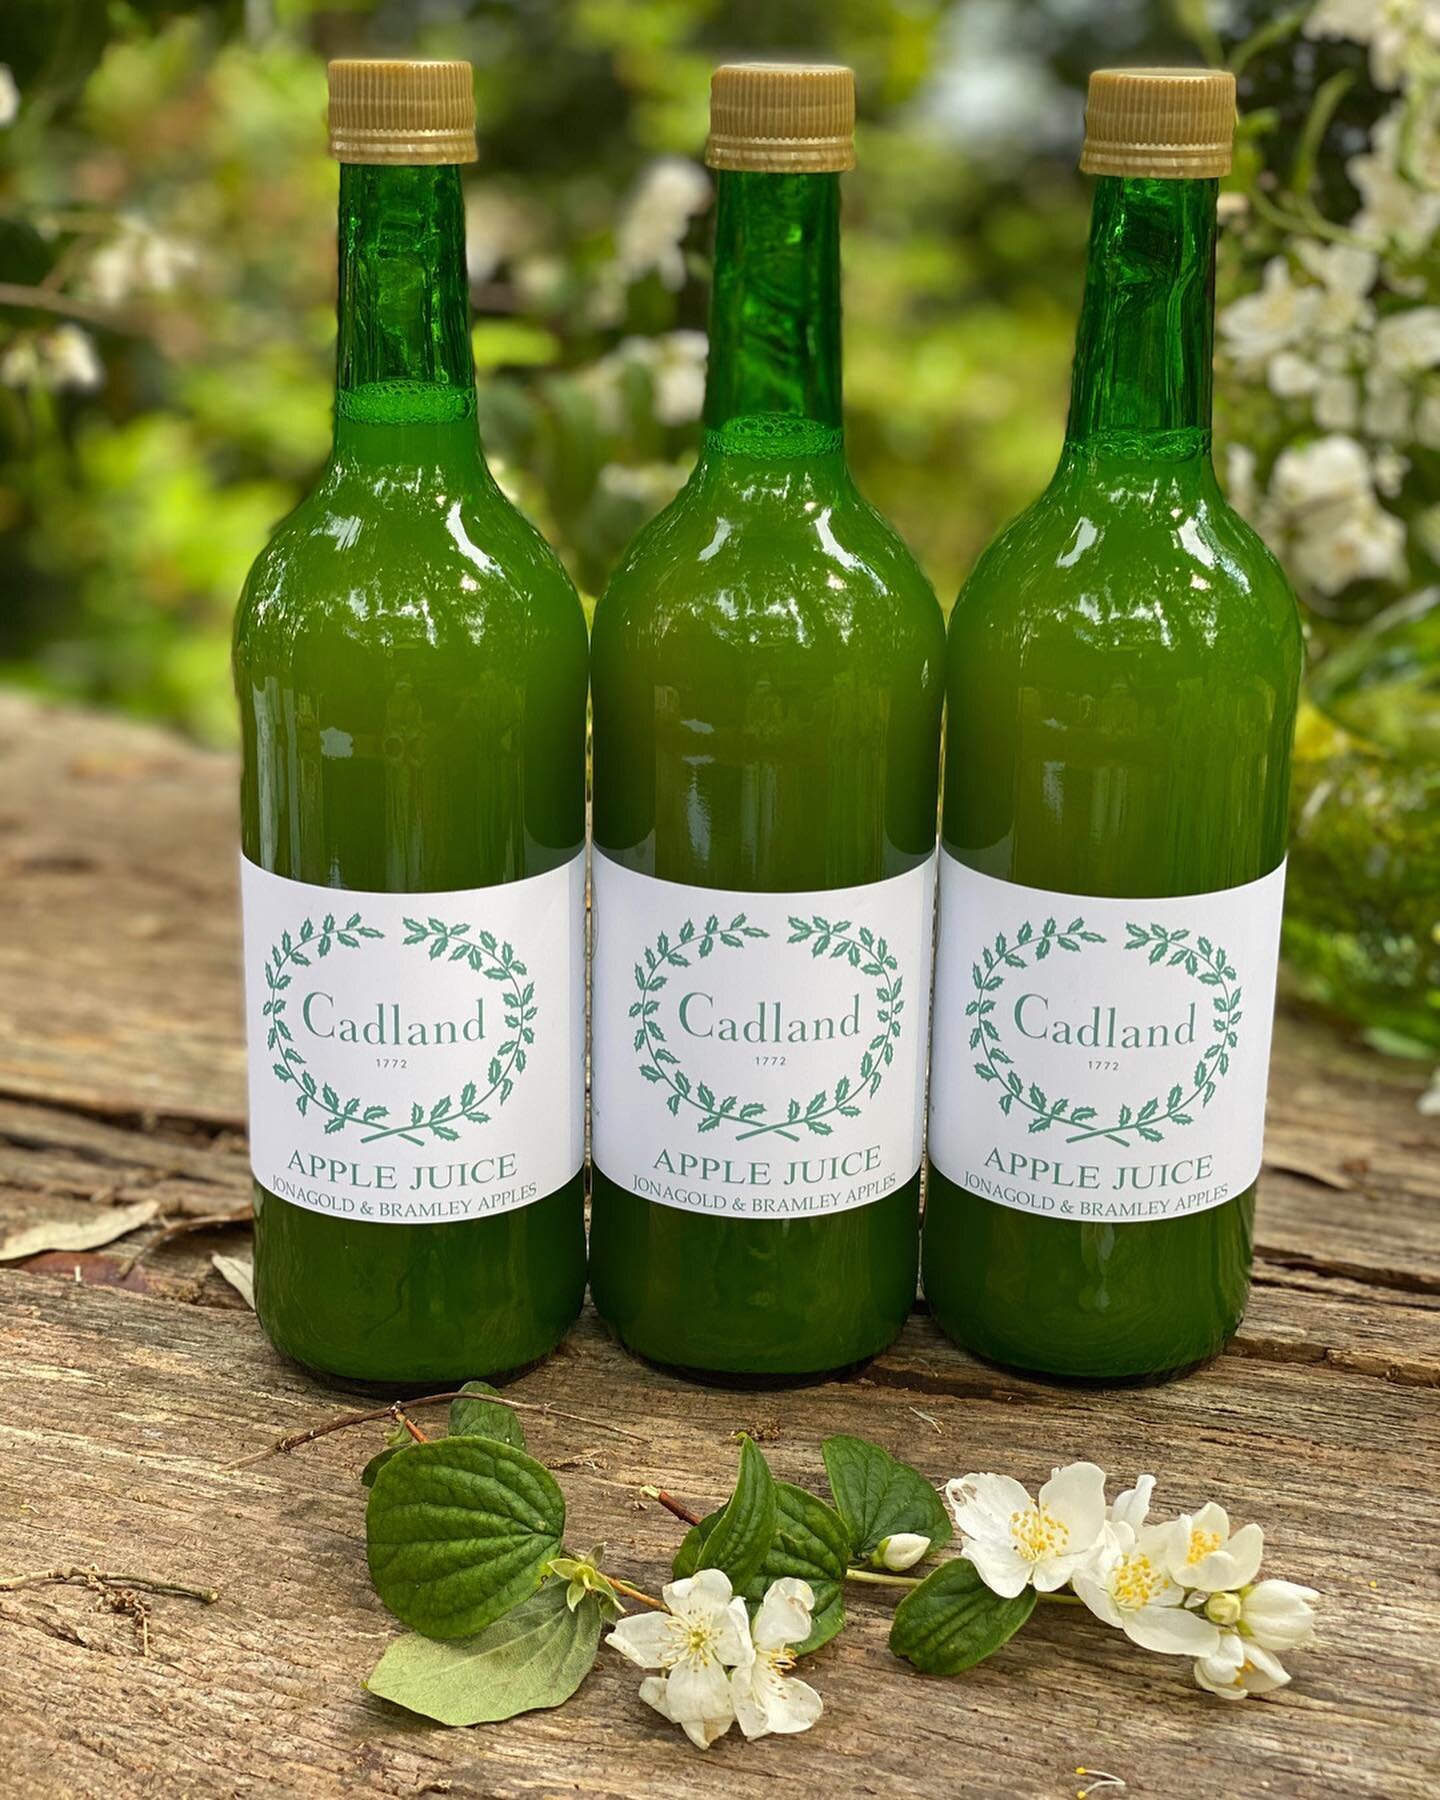 Pure Pressed Cadland Apple Juice and Elderflower Cordial 🍏 

100% natural, nothing added - just the way we like it. Available now from our @ThePopUpHotel store and online
.⠀⠀⠀⠀⠀⠀⠀⠀⠀
.
.
.
.
.
.
.
.
.
.
. 
#applejuice #elderflowercordial #naturalprod